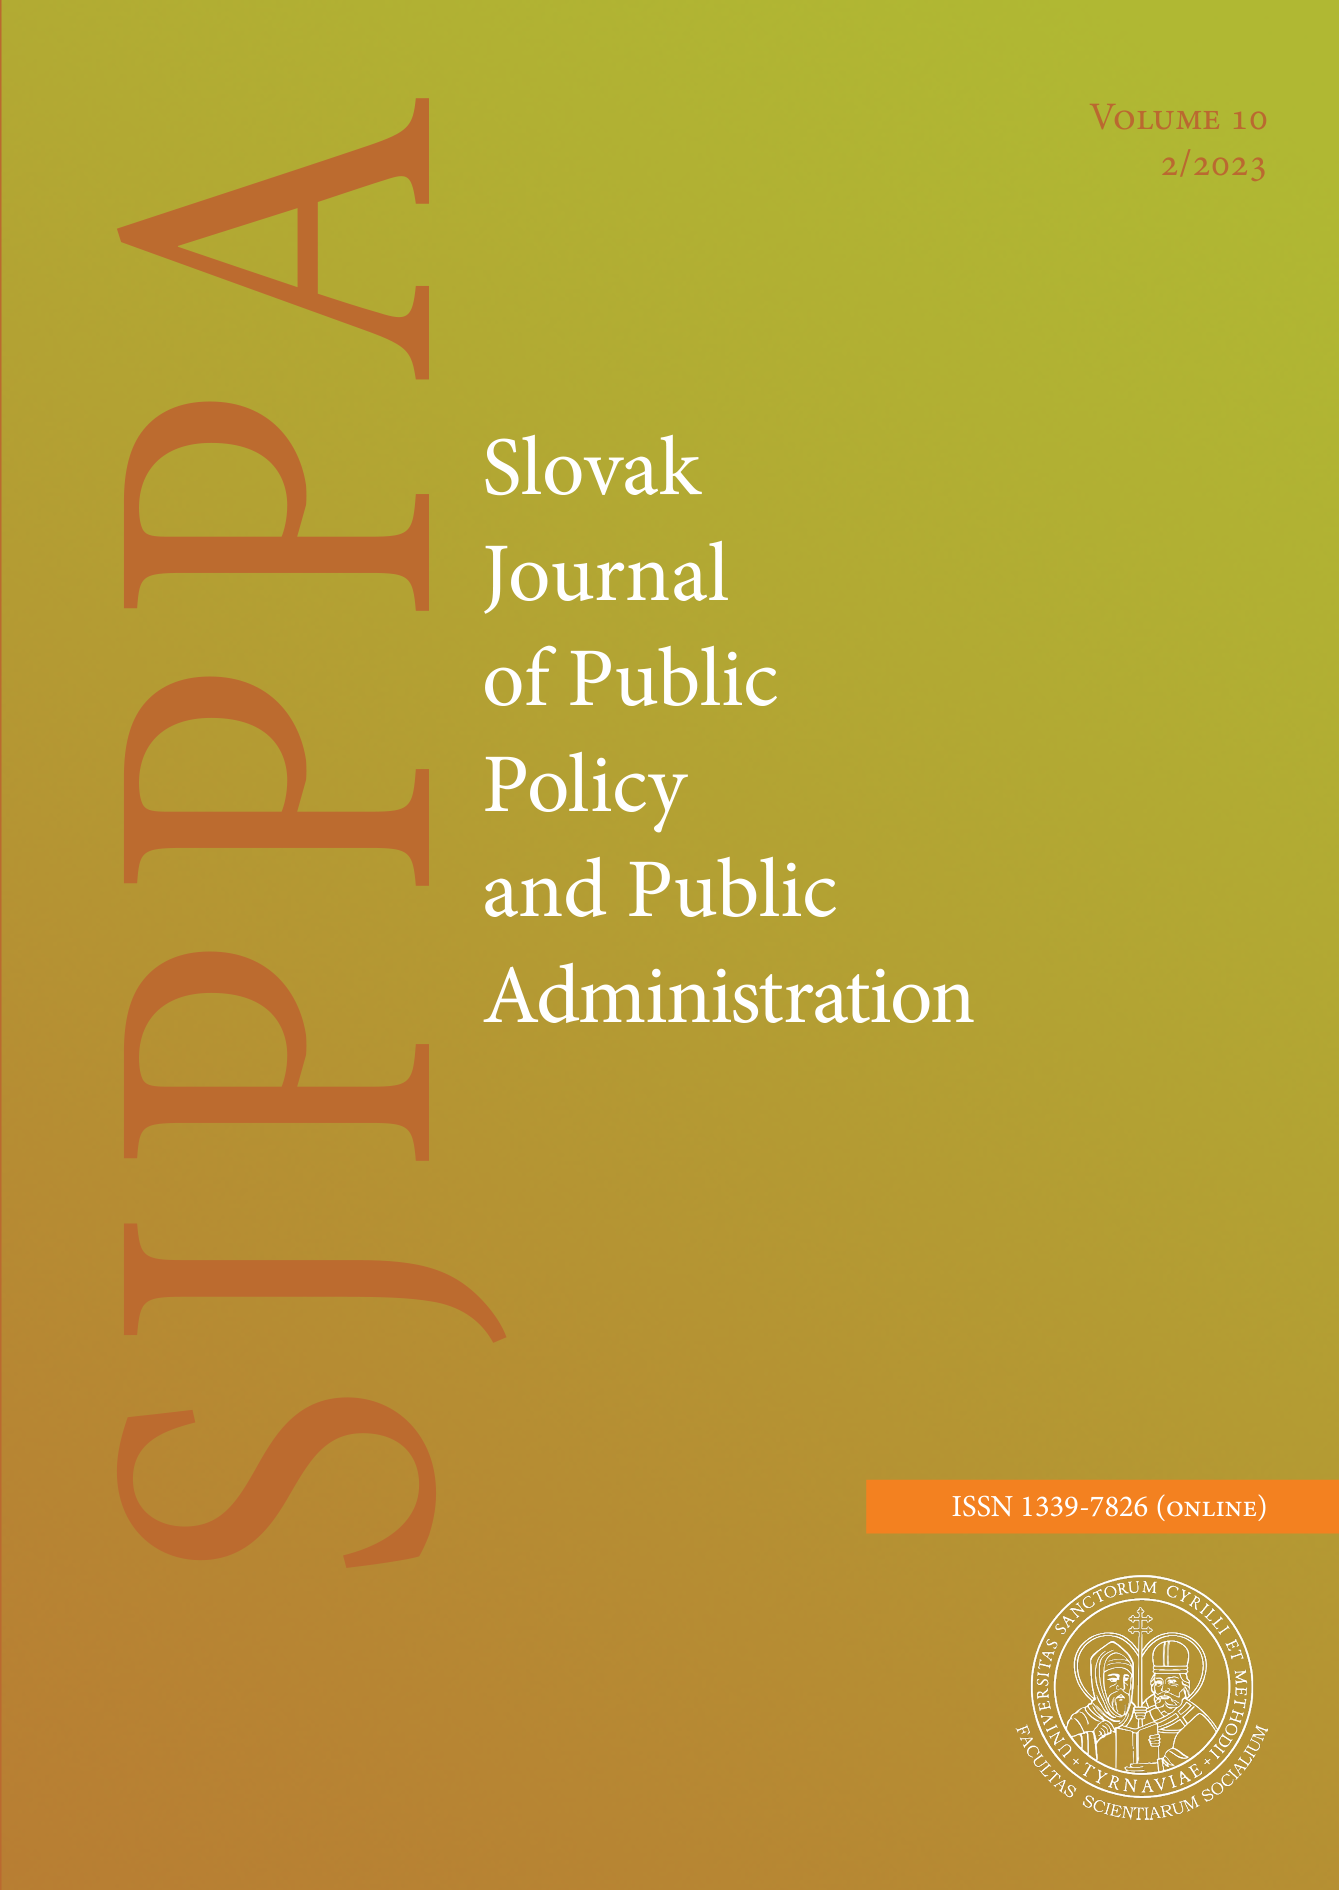 					View Vol. 10 No. 2 (2023): Slovak Journal of Public Policy and Public Administration
				